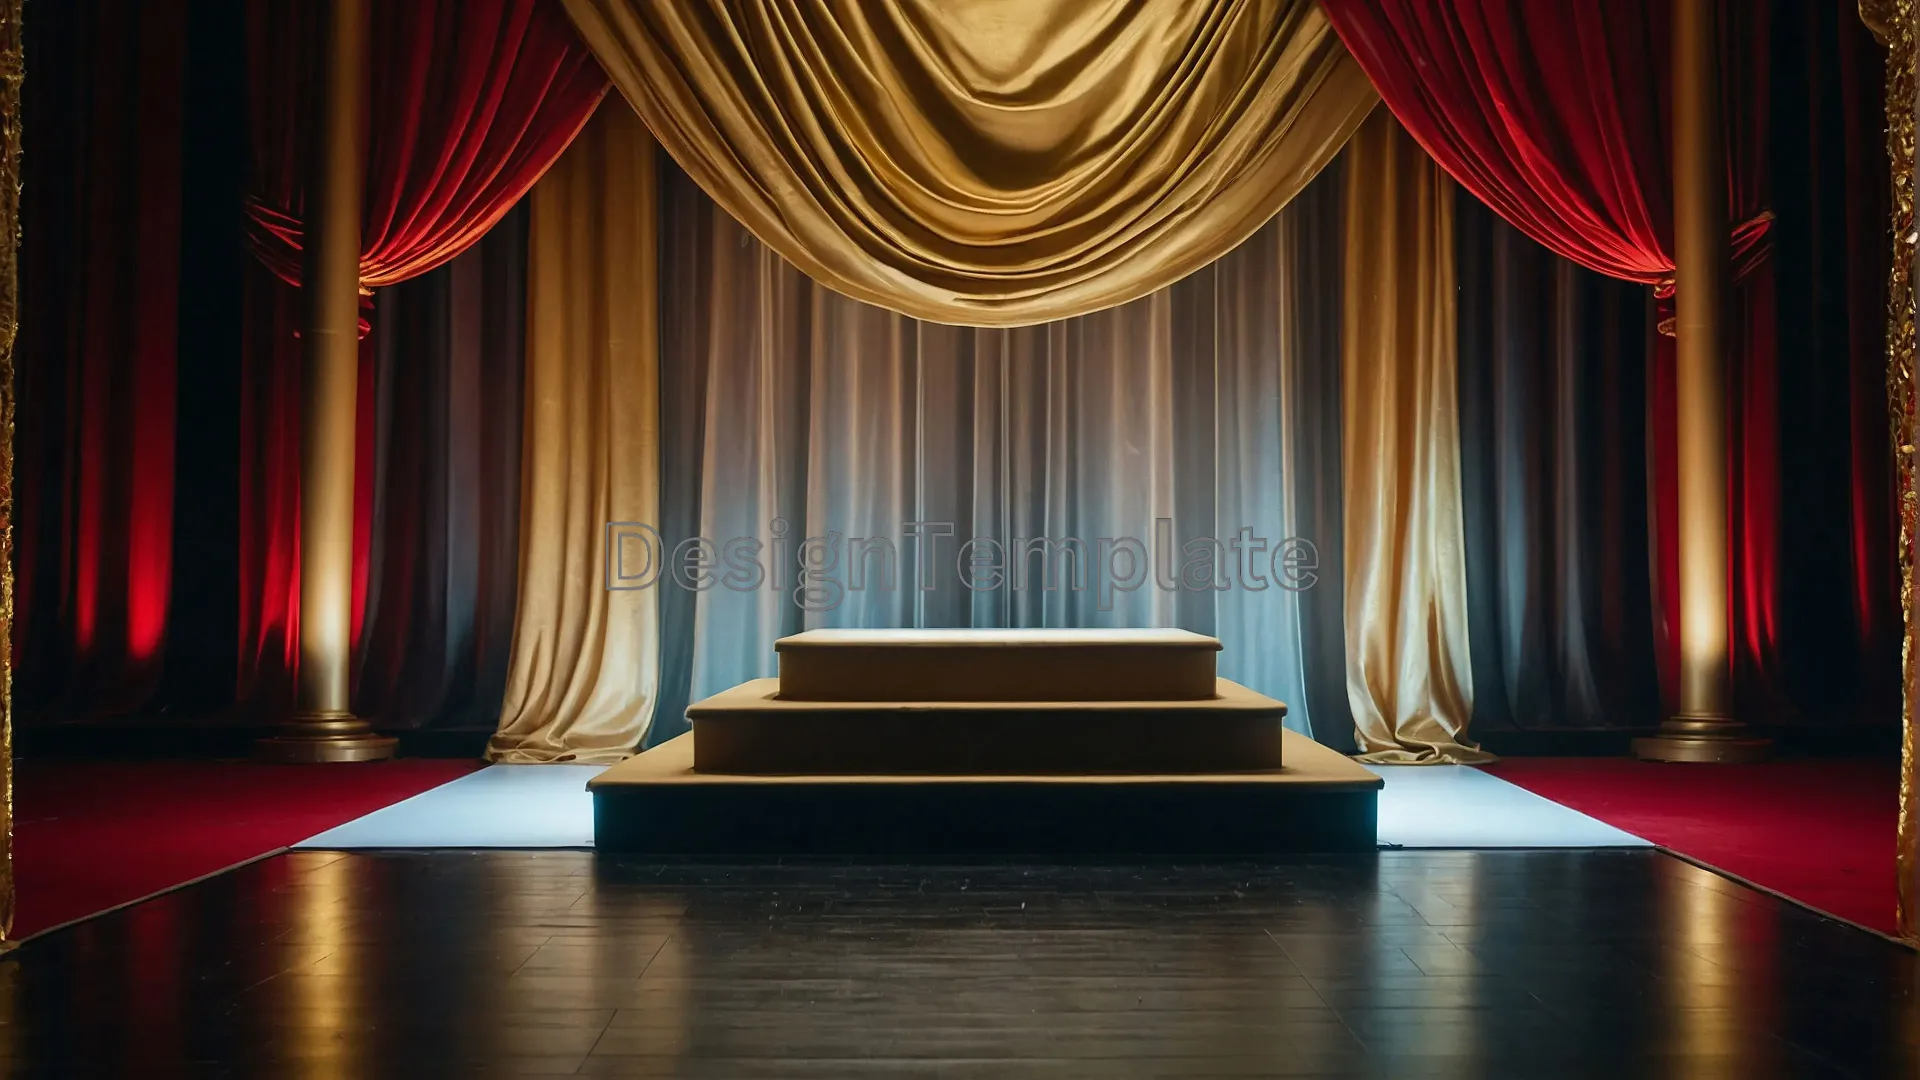 Luminous Texture Award Show Stage Shines with Golden Fabric image